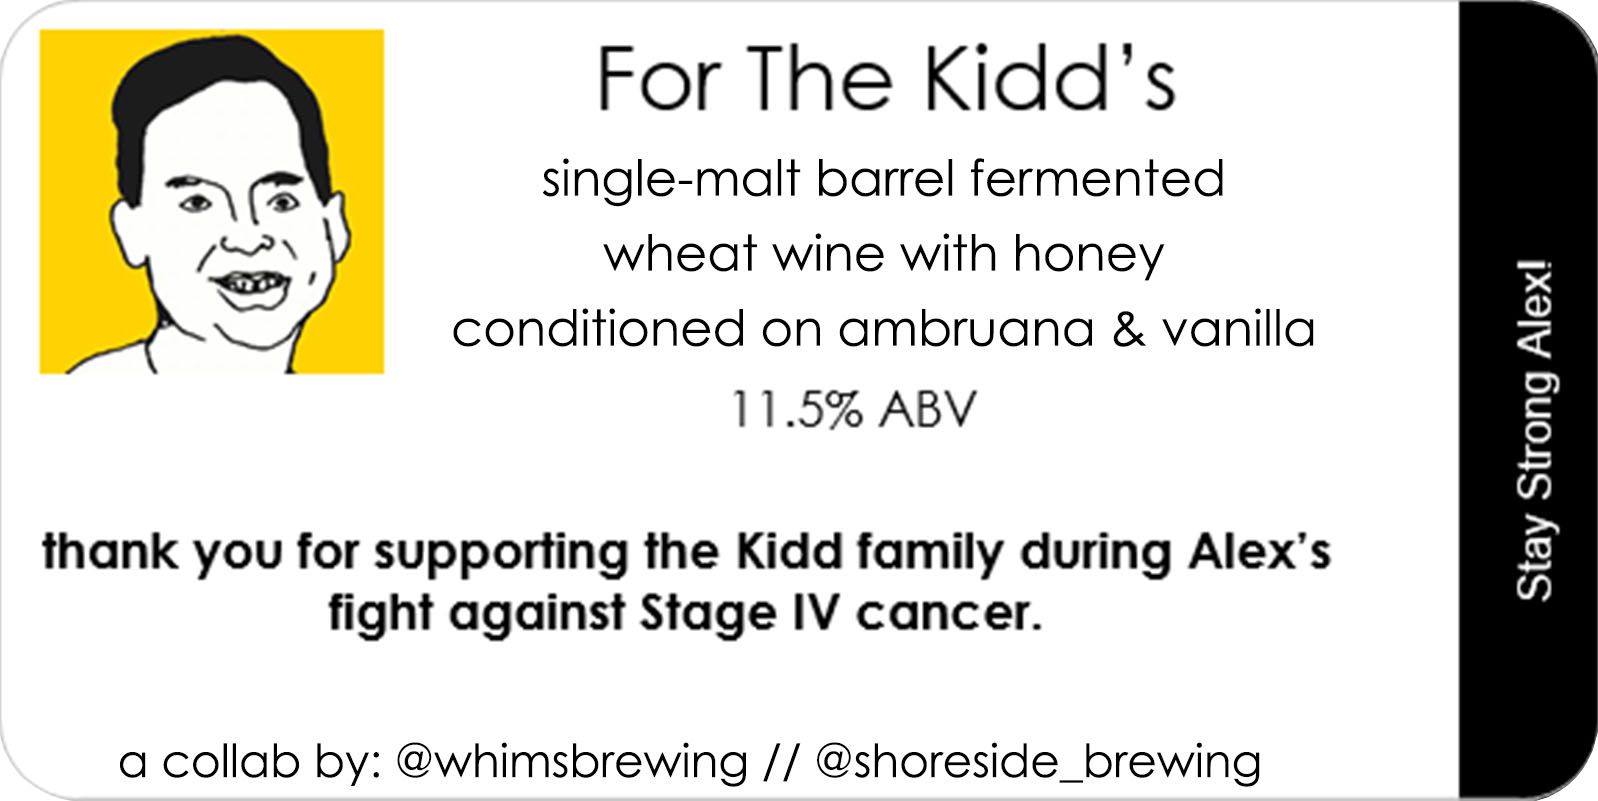 Label Image for For The Kidd's